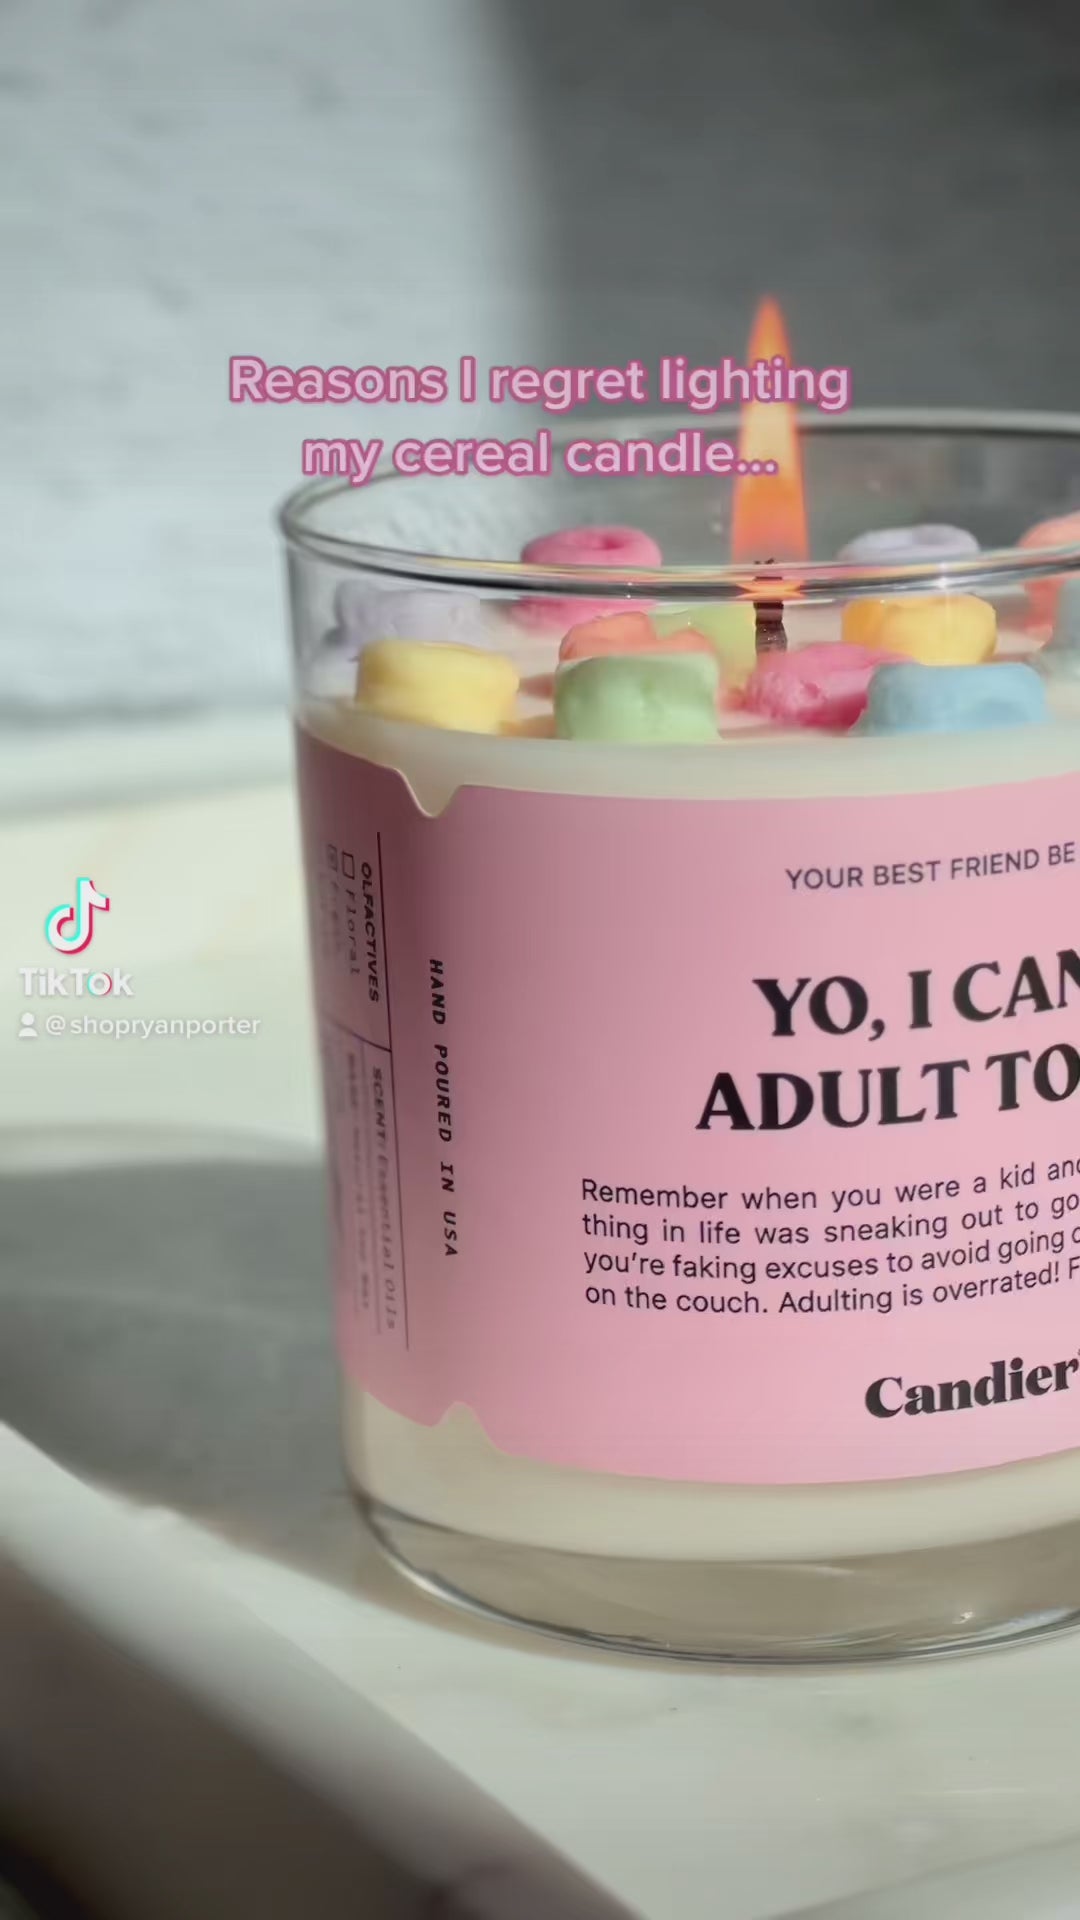 https://www.shopryanporter.com/products/munchies-cereal-candle-1	"Luxury candle with a creative cereal design on top, encased in a pink-labeled glass jar."